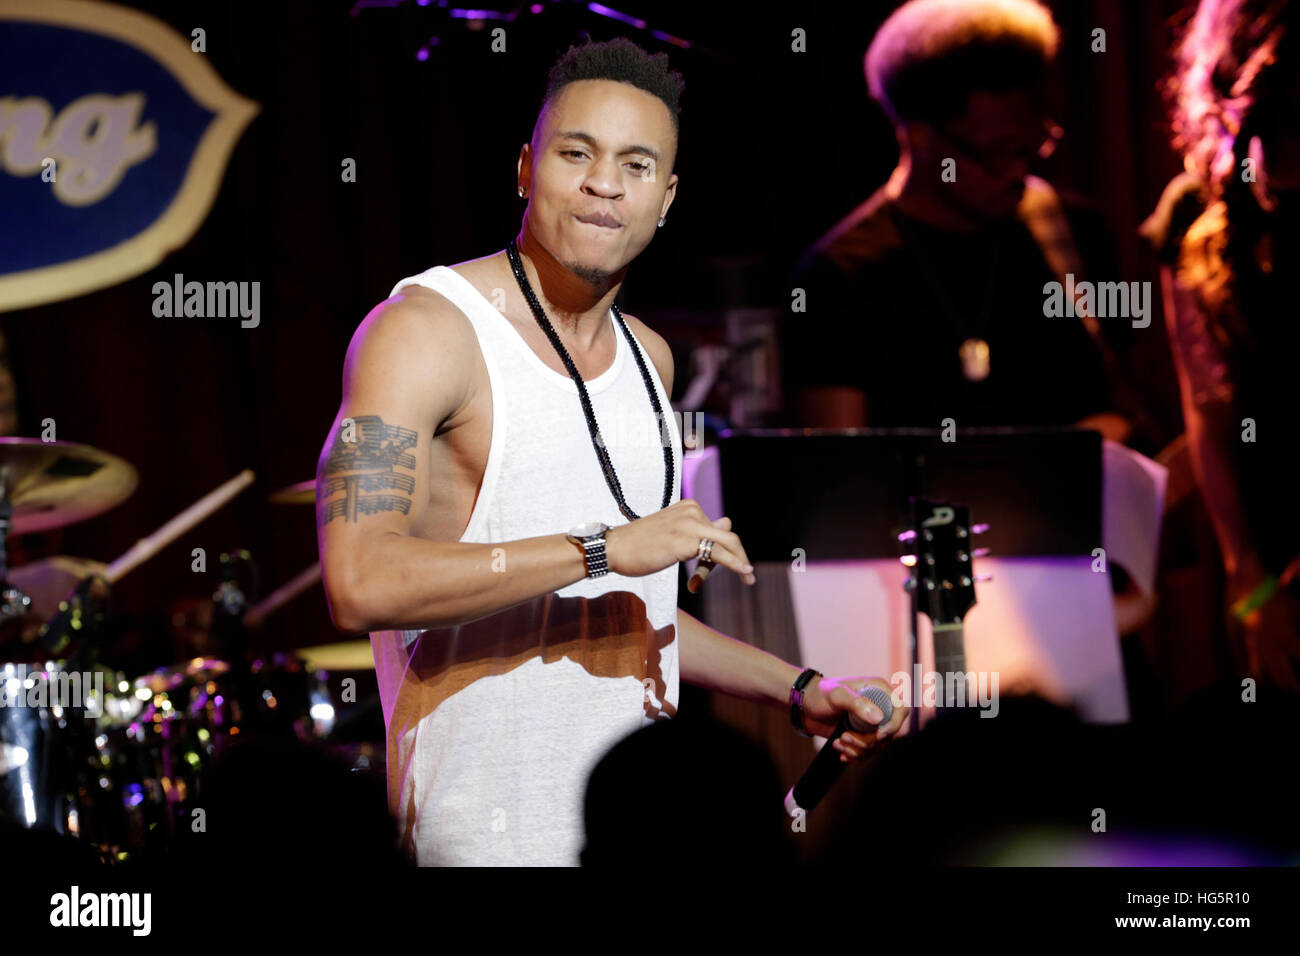 Rotimi performs at the MBK Entertainment Holiday party Stock Photo